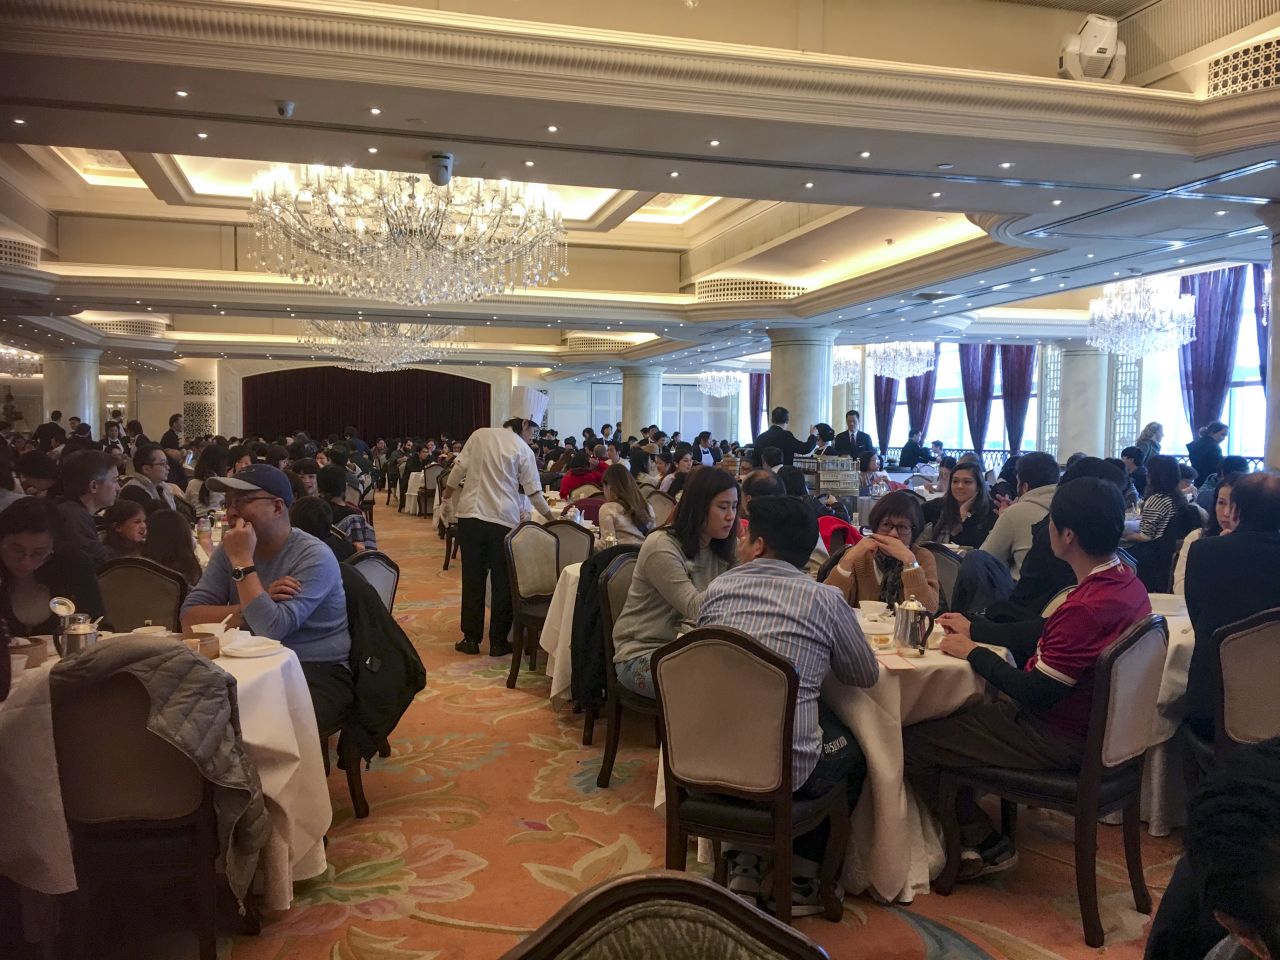 Families dine at Maxim's palace in City Hall. On Sunday afternoons, large families often venture out together for dim sum. The close familial networks of Asian cultures in general is well-known, providing both financial and social support as people get older. 